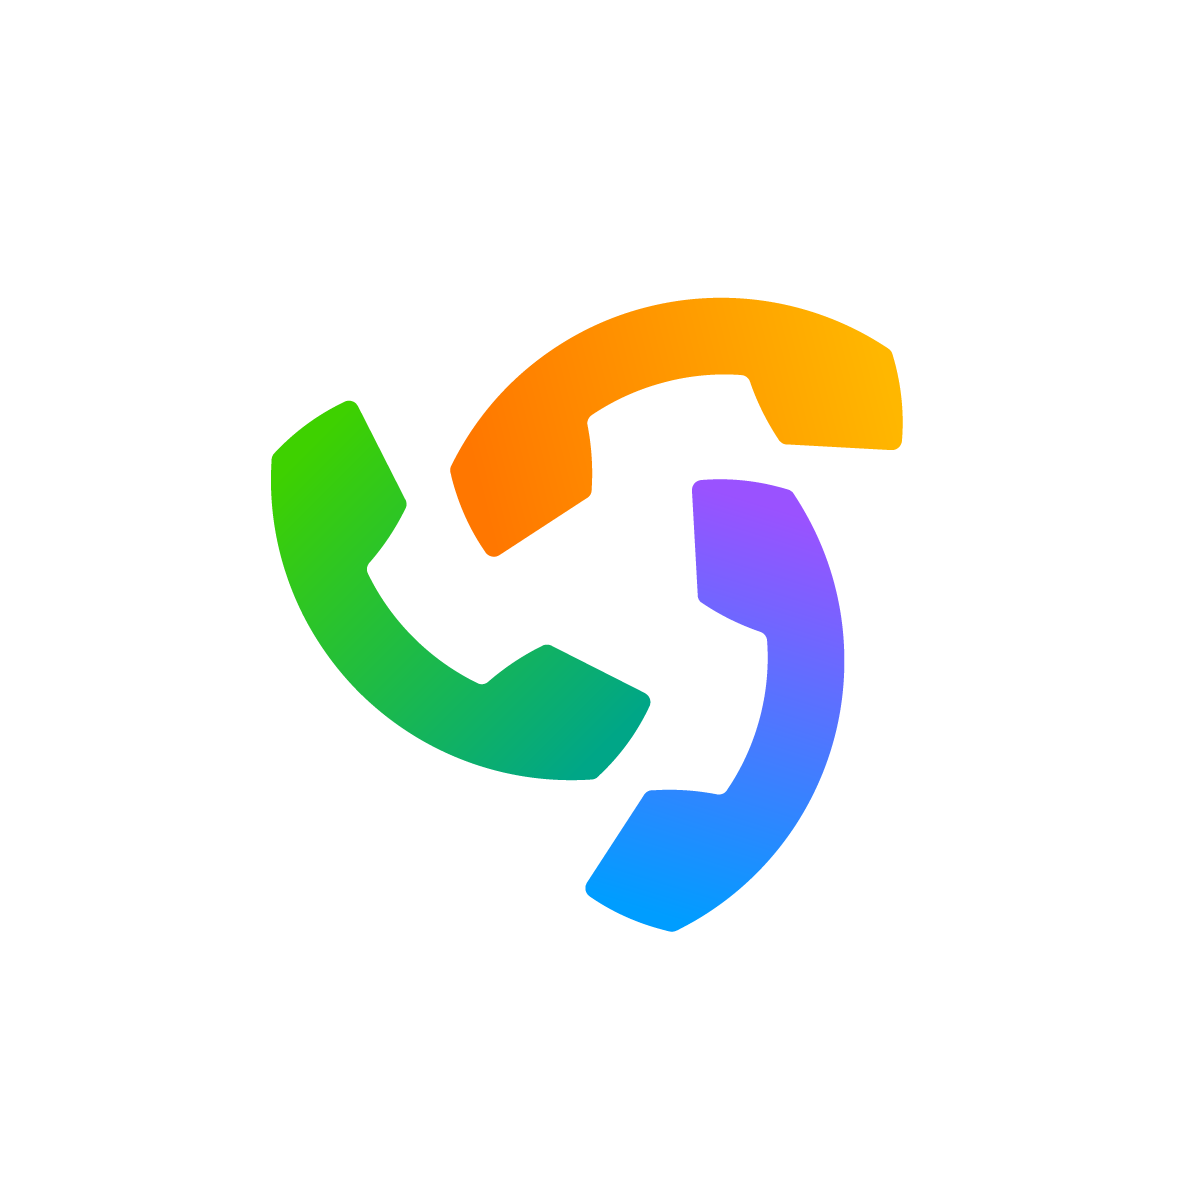 Colorful logo representing group call, chat, and communication with three phone handles forming the international phone symbol.